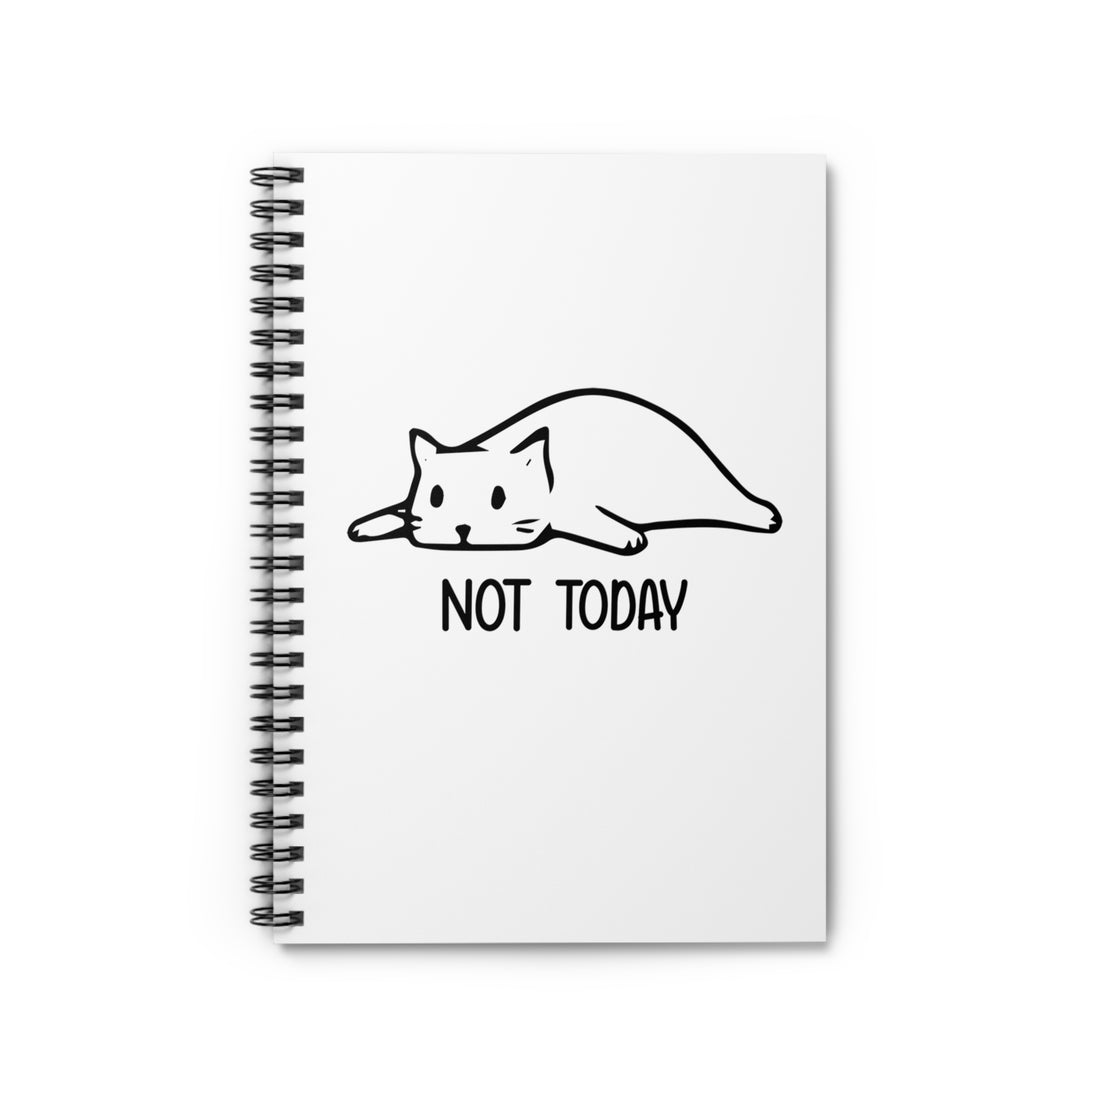 Not Today - Spiral Notebook - Ruled Line